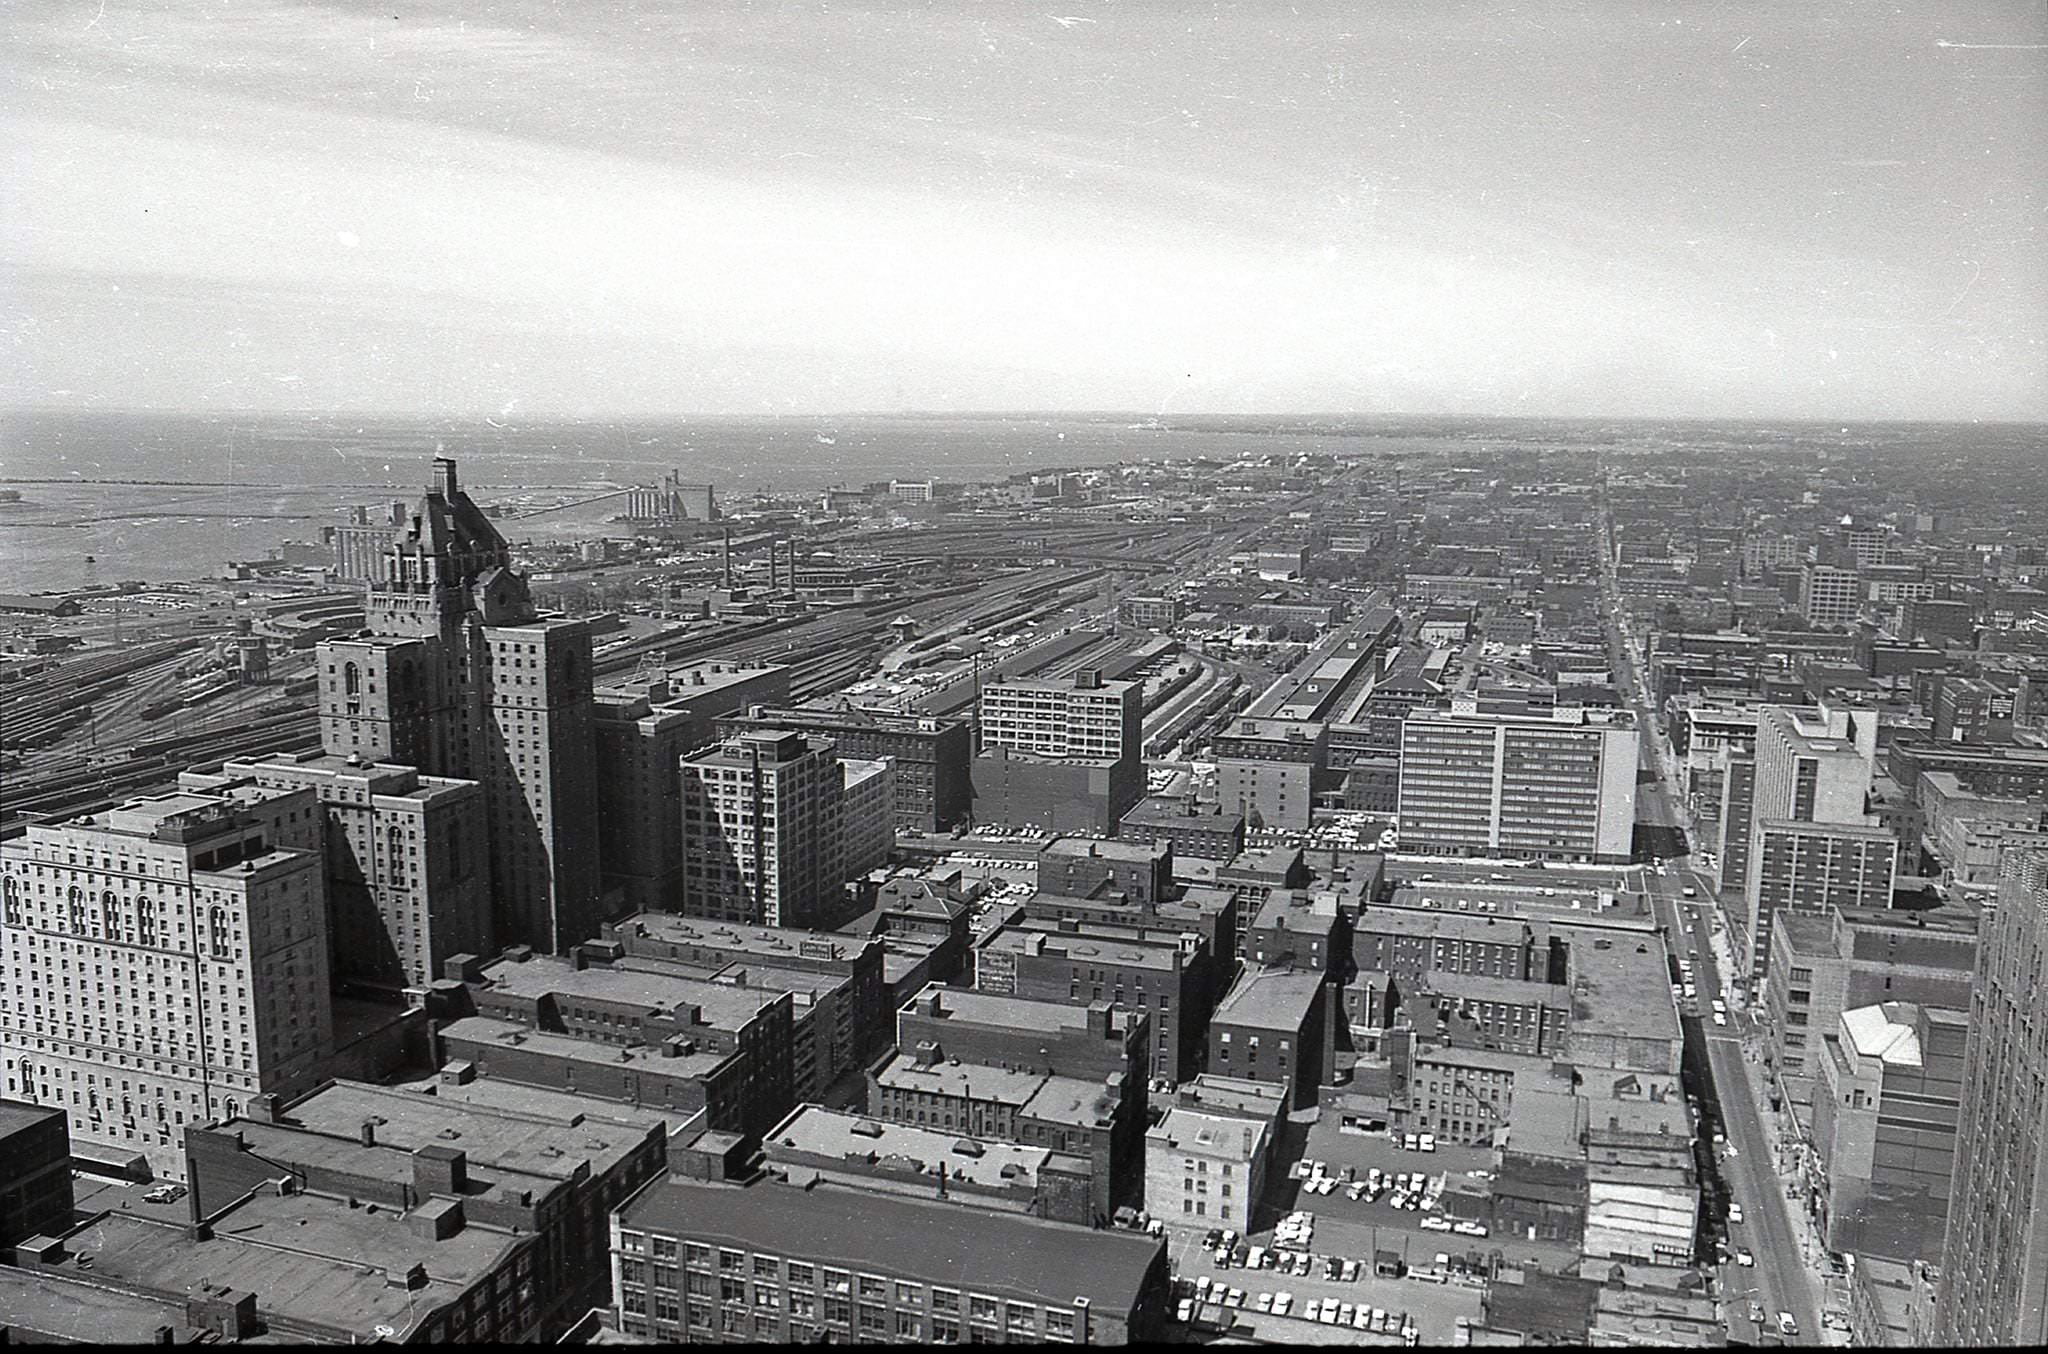 Early 1960s view looking west from the Canadian Bank of Commerce Building.